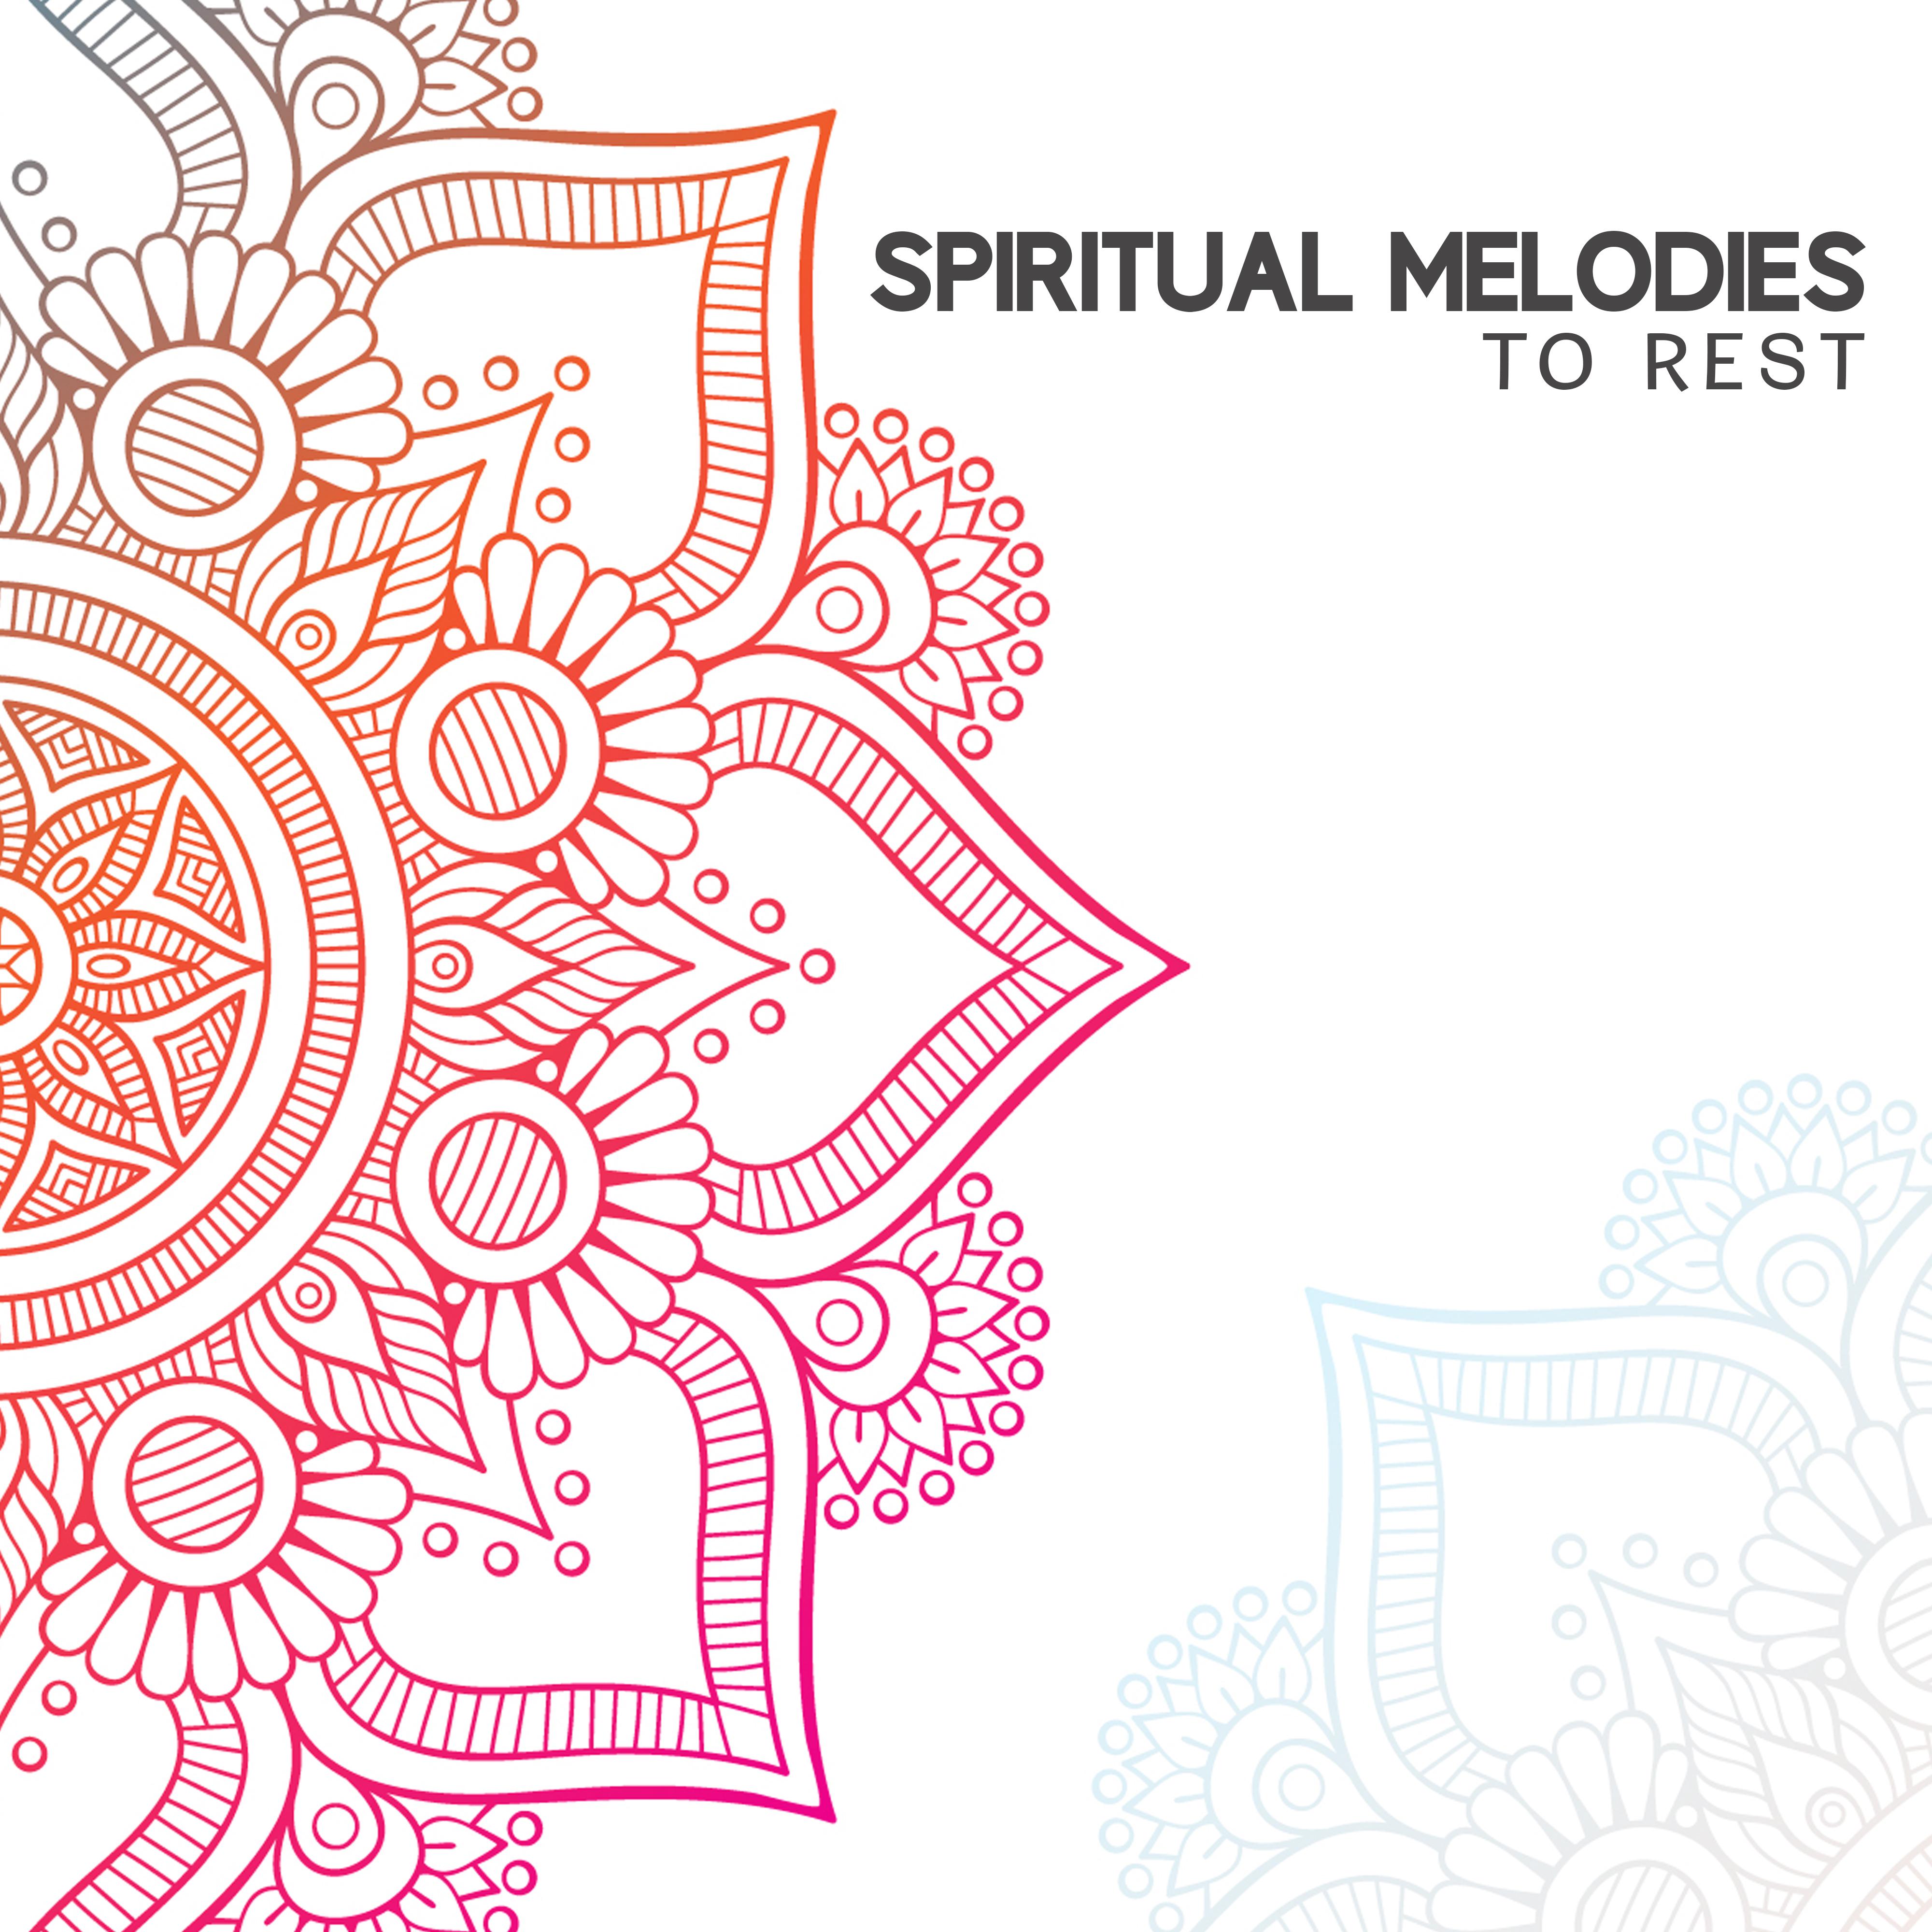 Spiritual Melodies to Rest